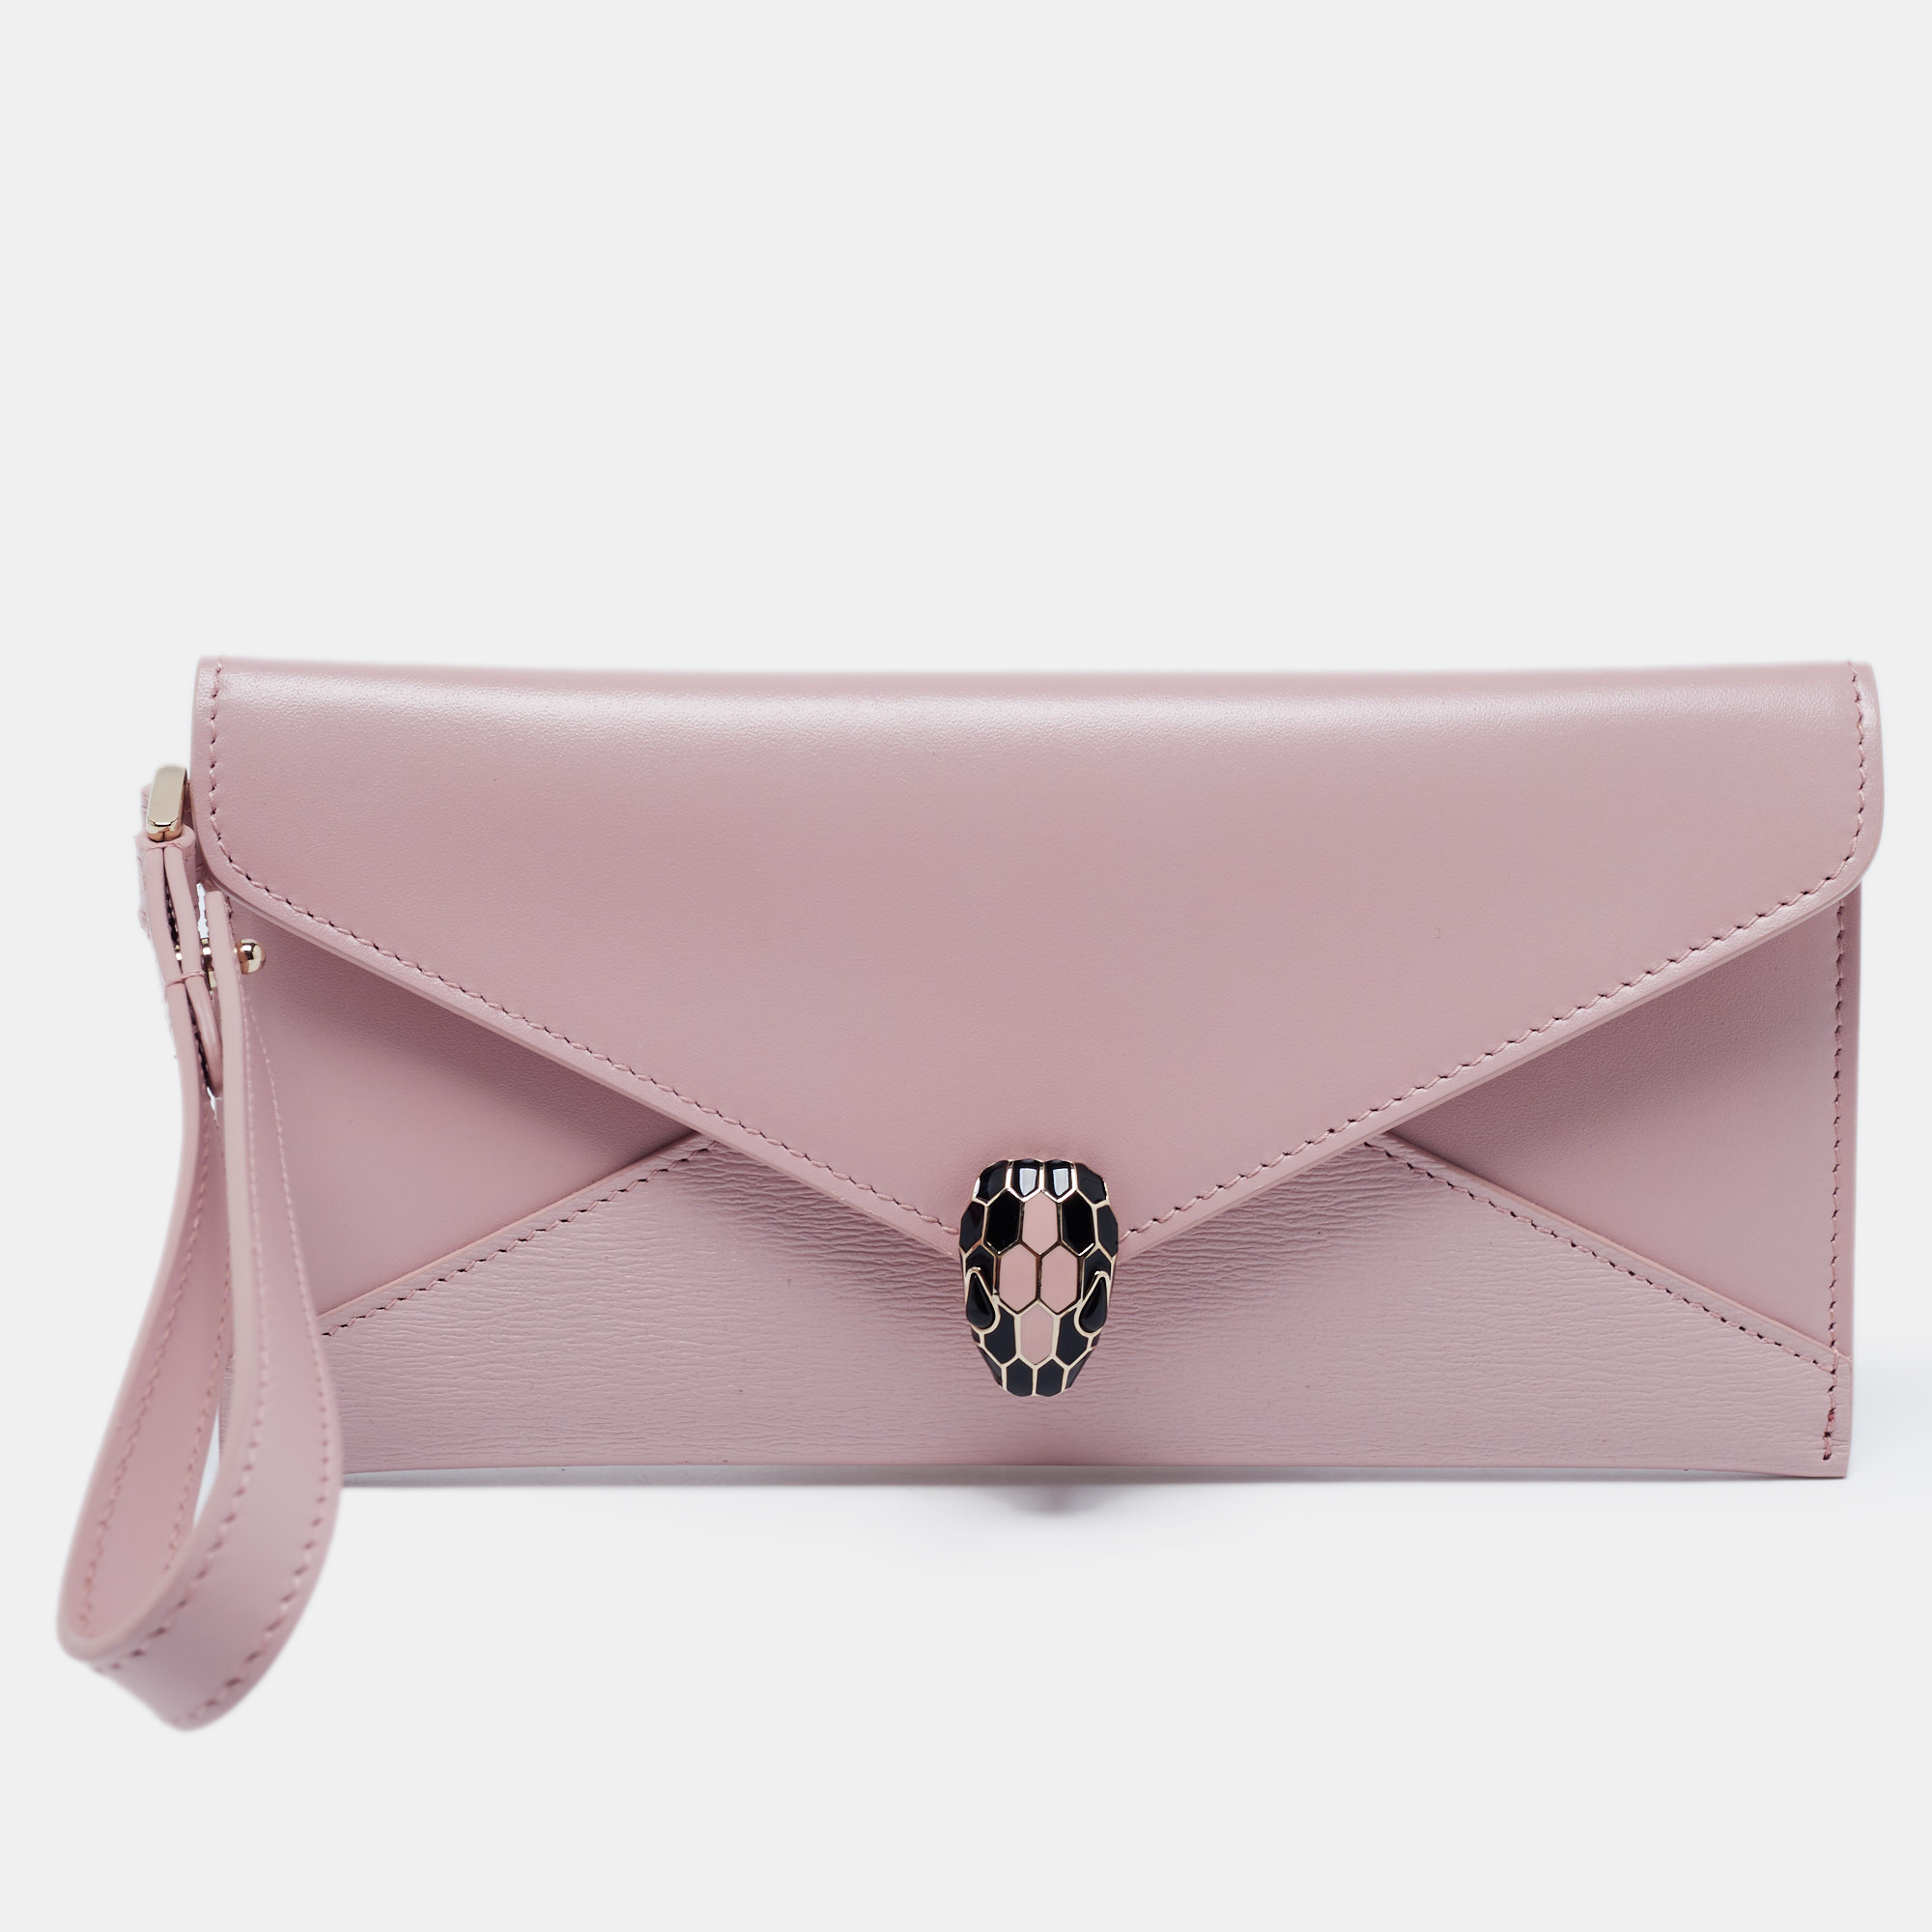 Bvlgari Two Tone Pink Leather Serpenti Forever Envelope Pouch